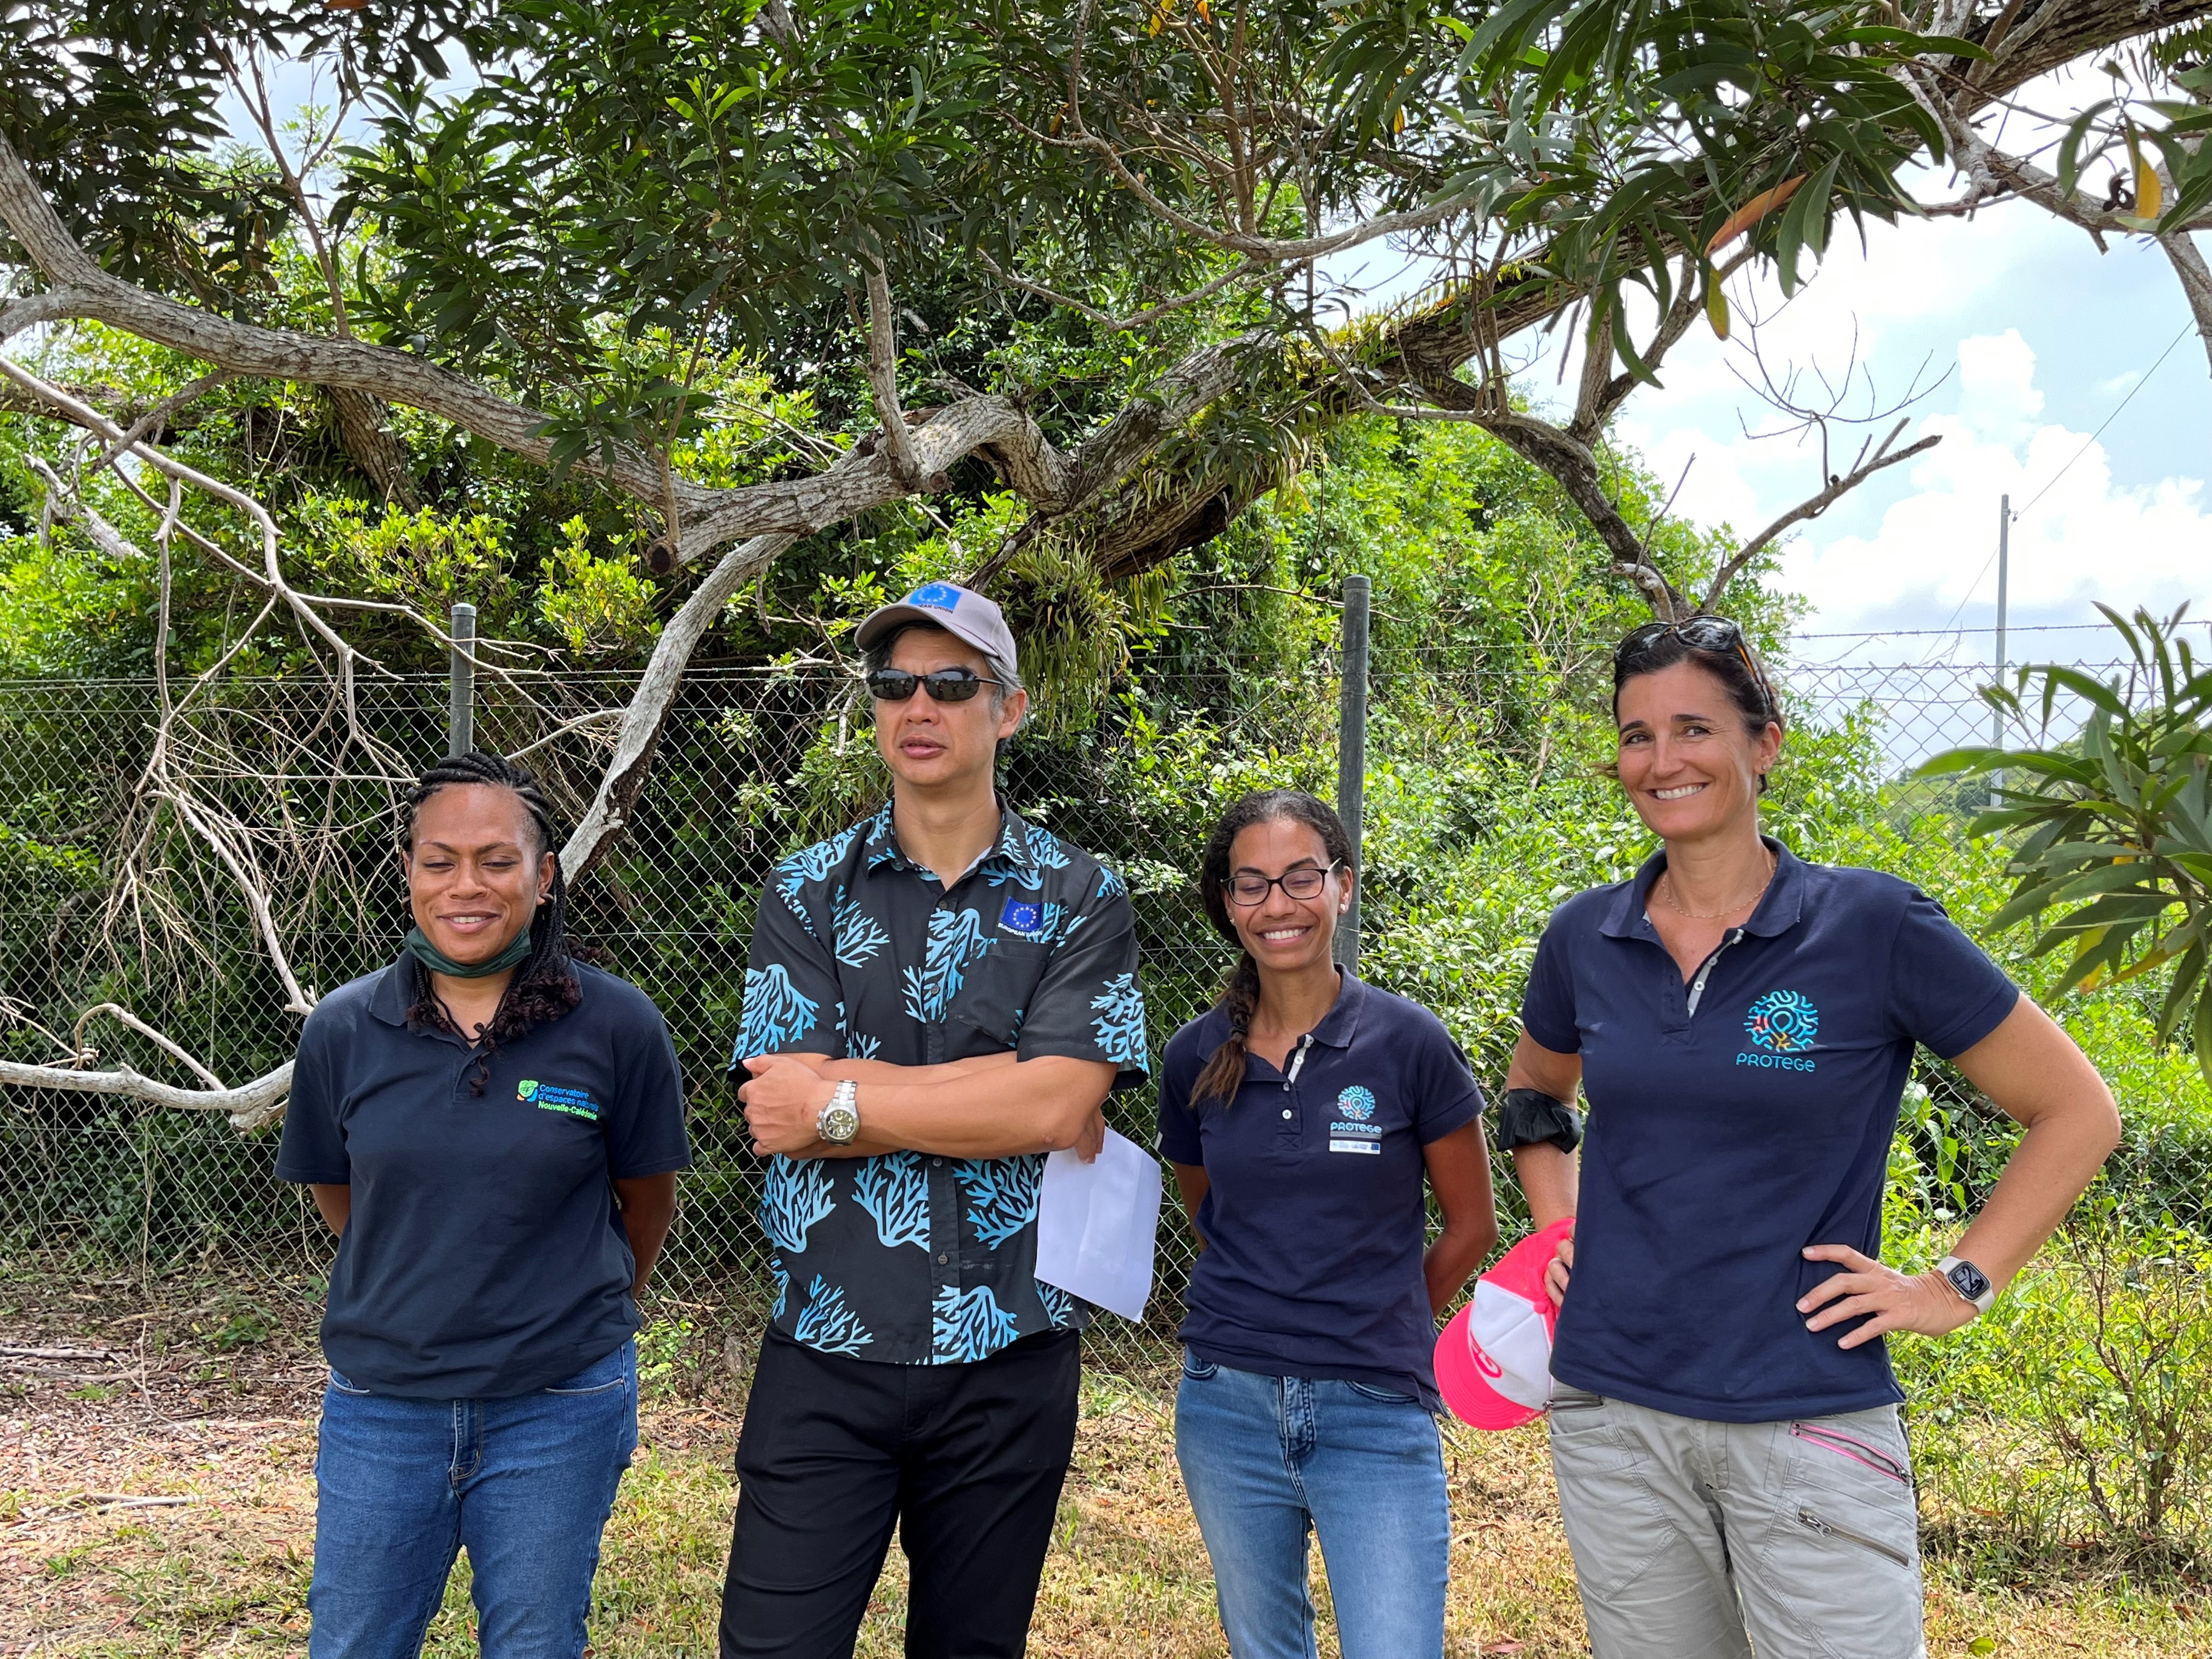 Mr. Sujiro Seam with the PROTEGE team of the conservatory of natural areas and the Pacific Community.